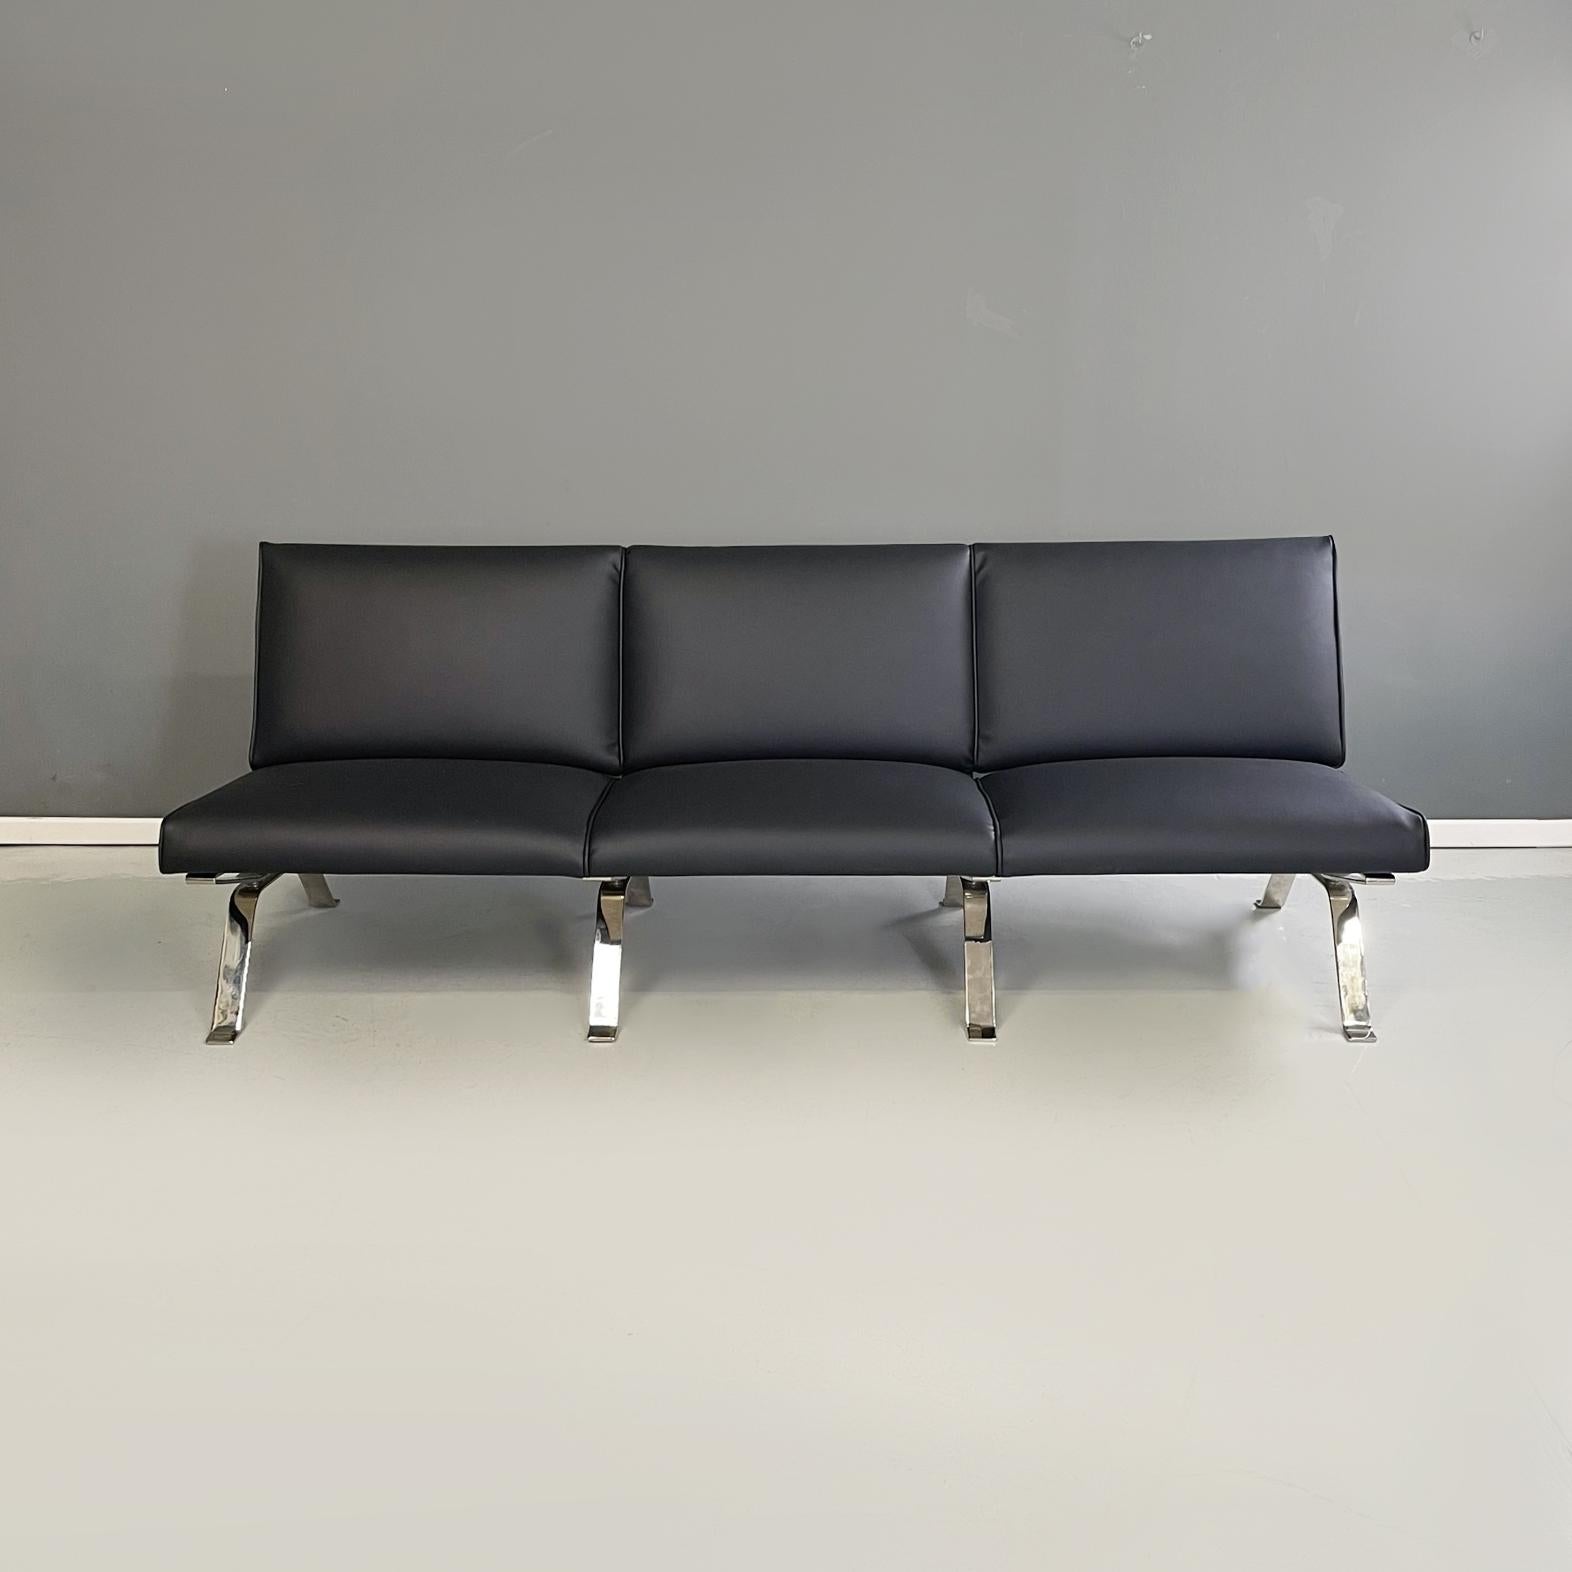 Italian modern black leather Three-seater sofa by Gastone Rinaldi for Rima, 1970s
Three-seater sofa with seat and backrests padded and covered in black faux leather. The legs and the structure are in curved chromed steel.
Produced by Rima in 1970s